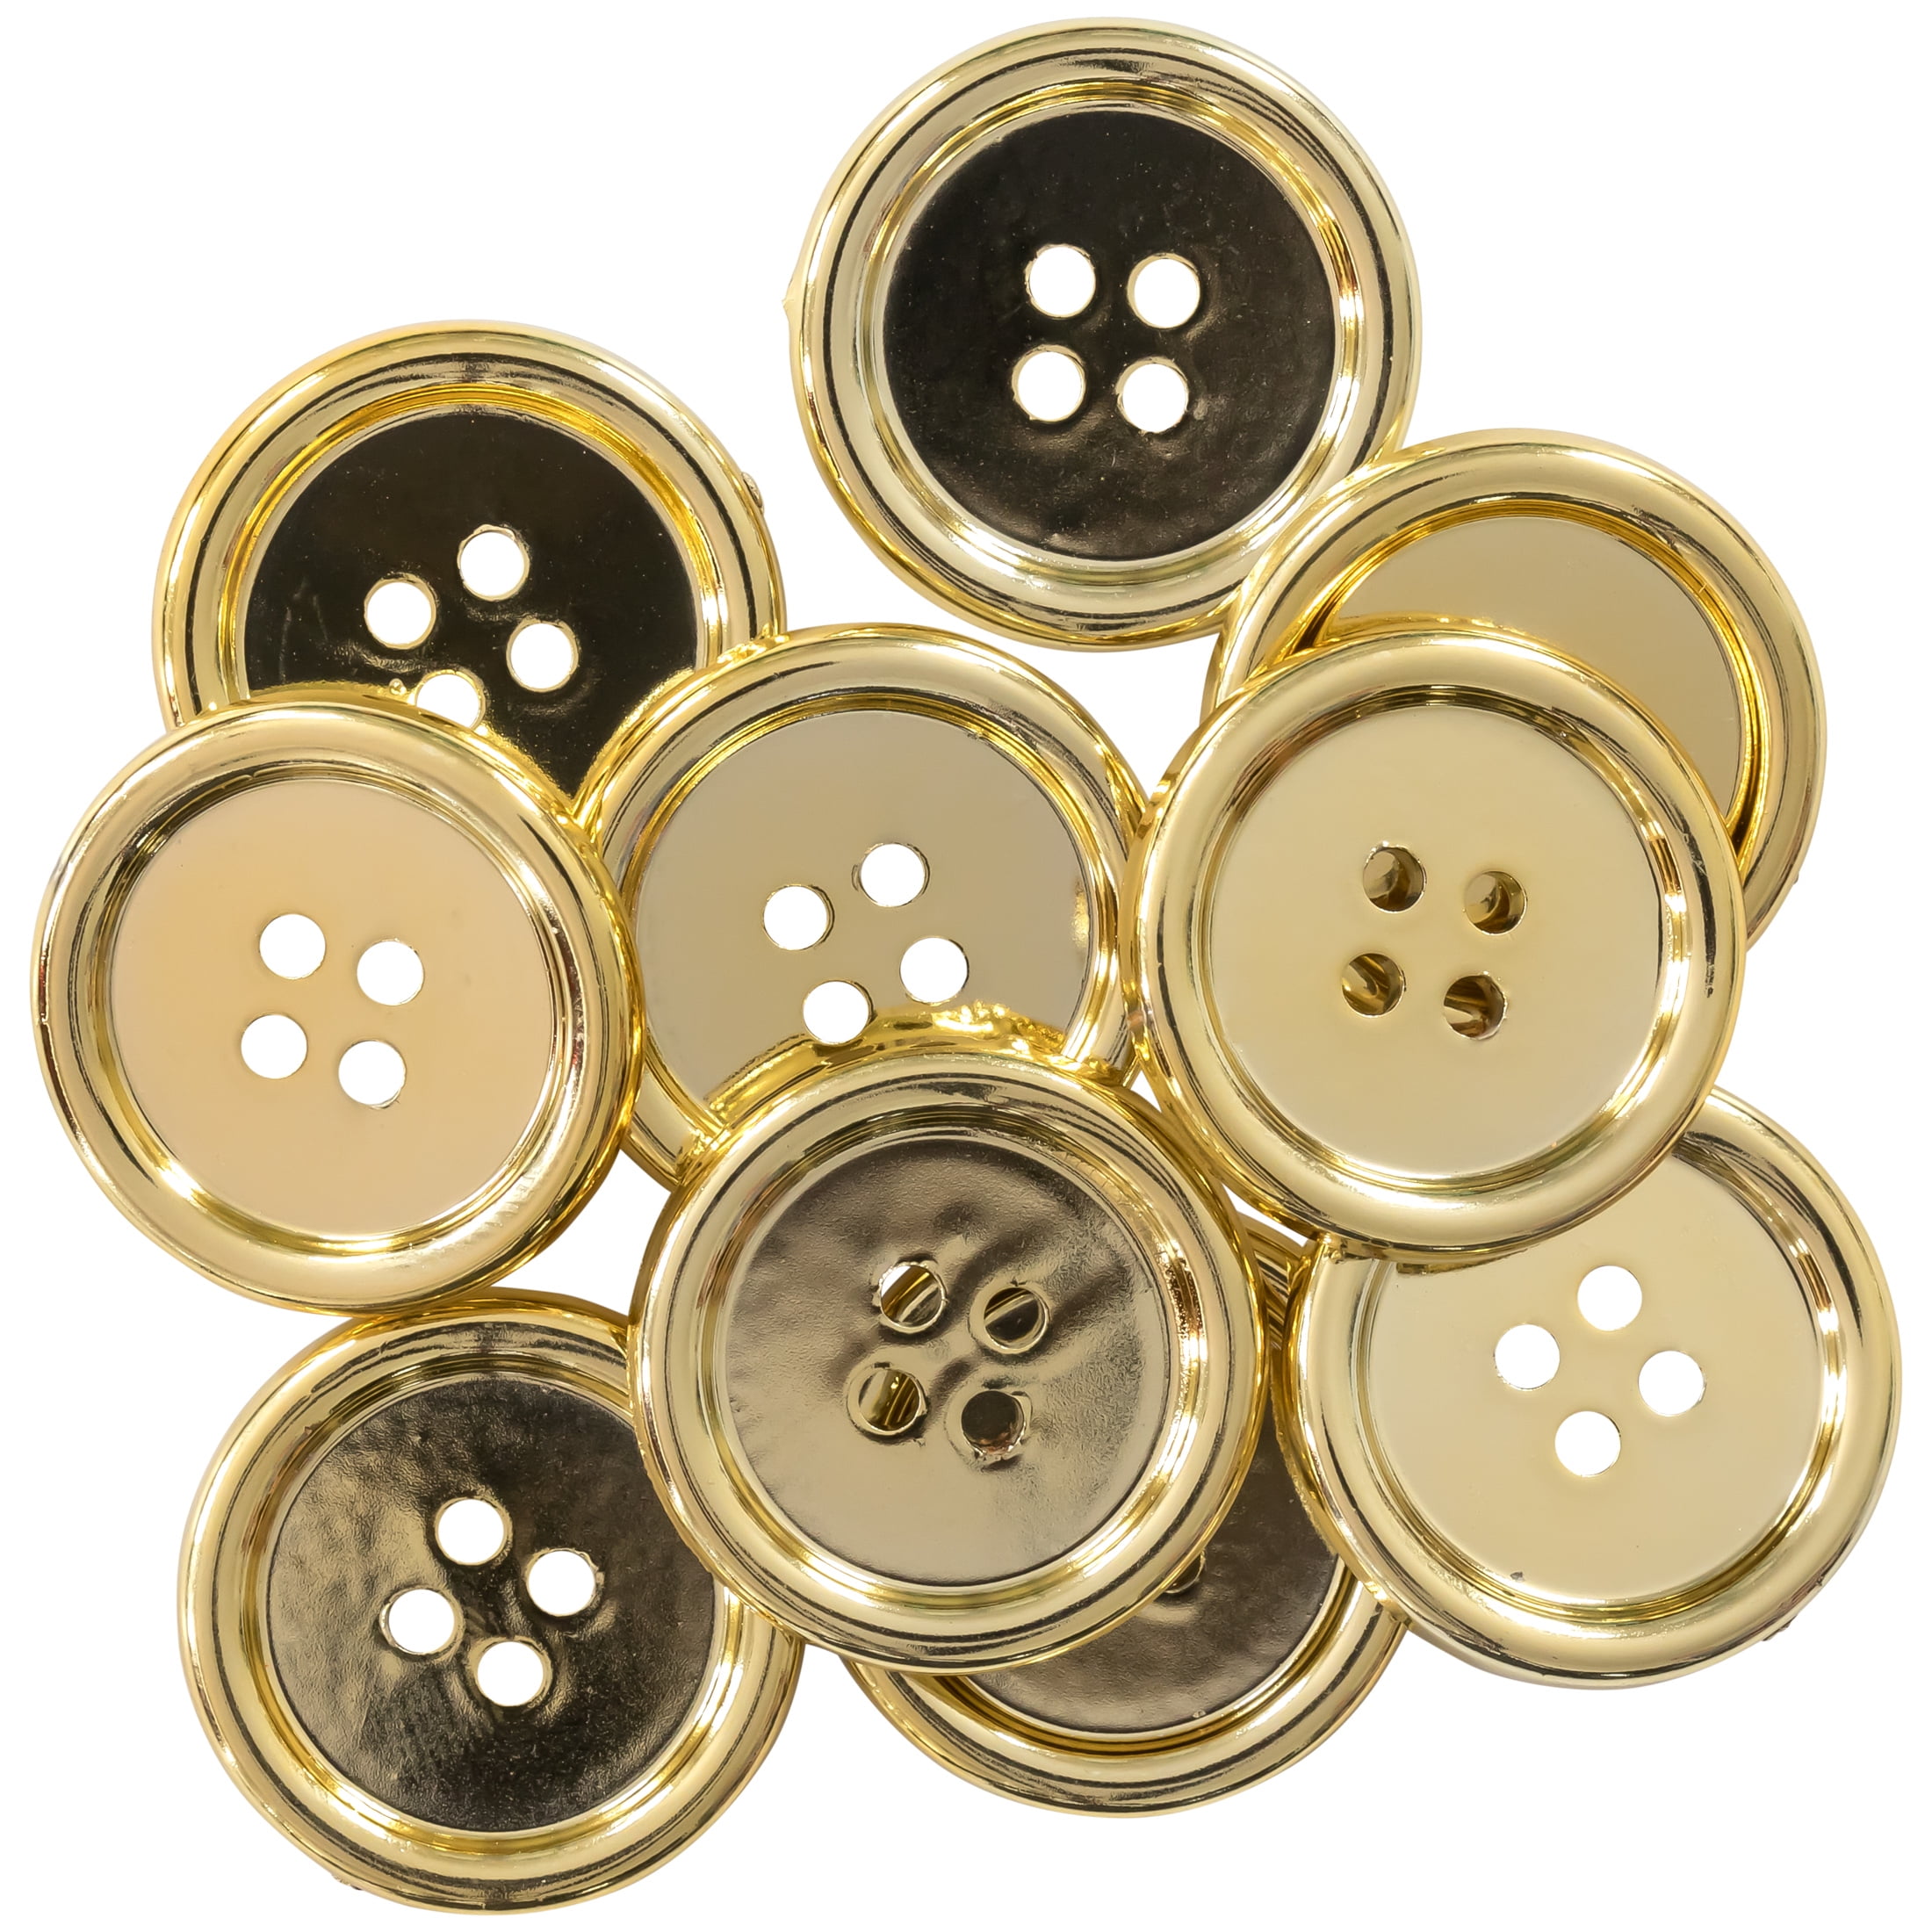 Pkg of 20 Plastic GOLD STAR Craft Buttons 1/2 (12mm) (2134)